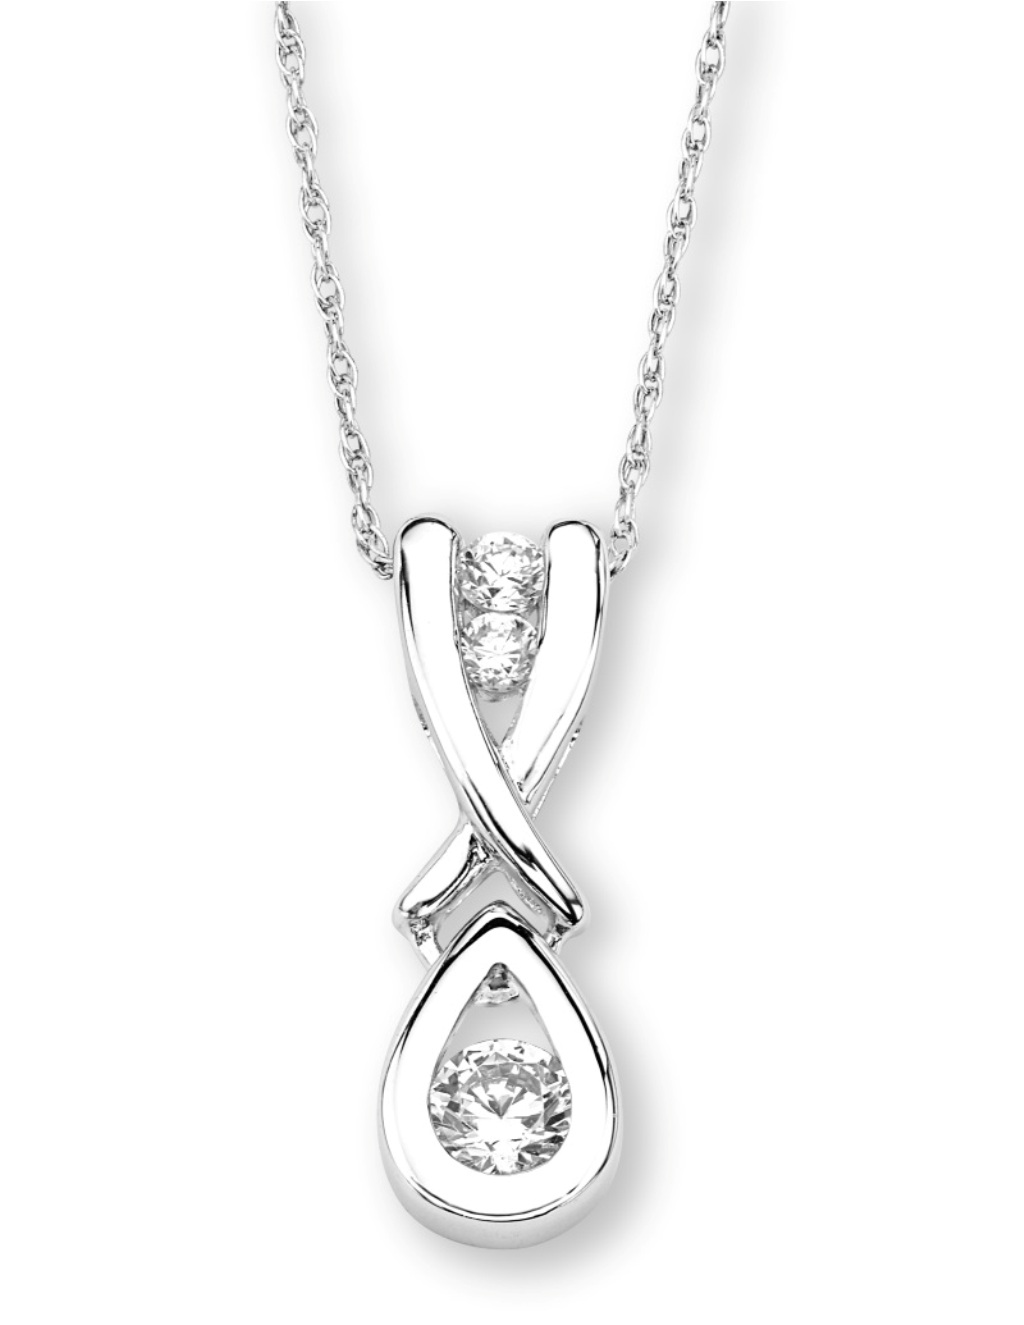  Round CZ Pear Pendant Necklace, Rhodium Plated Sterling Silver, 18